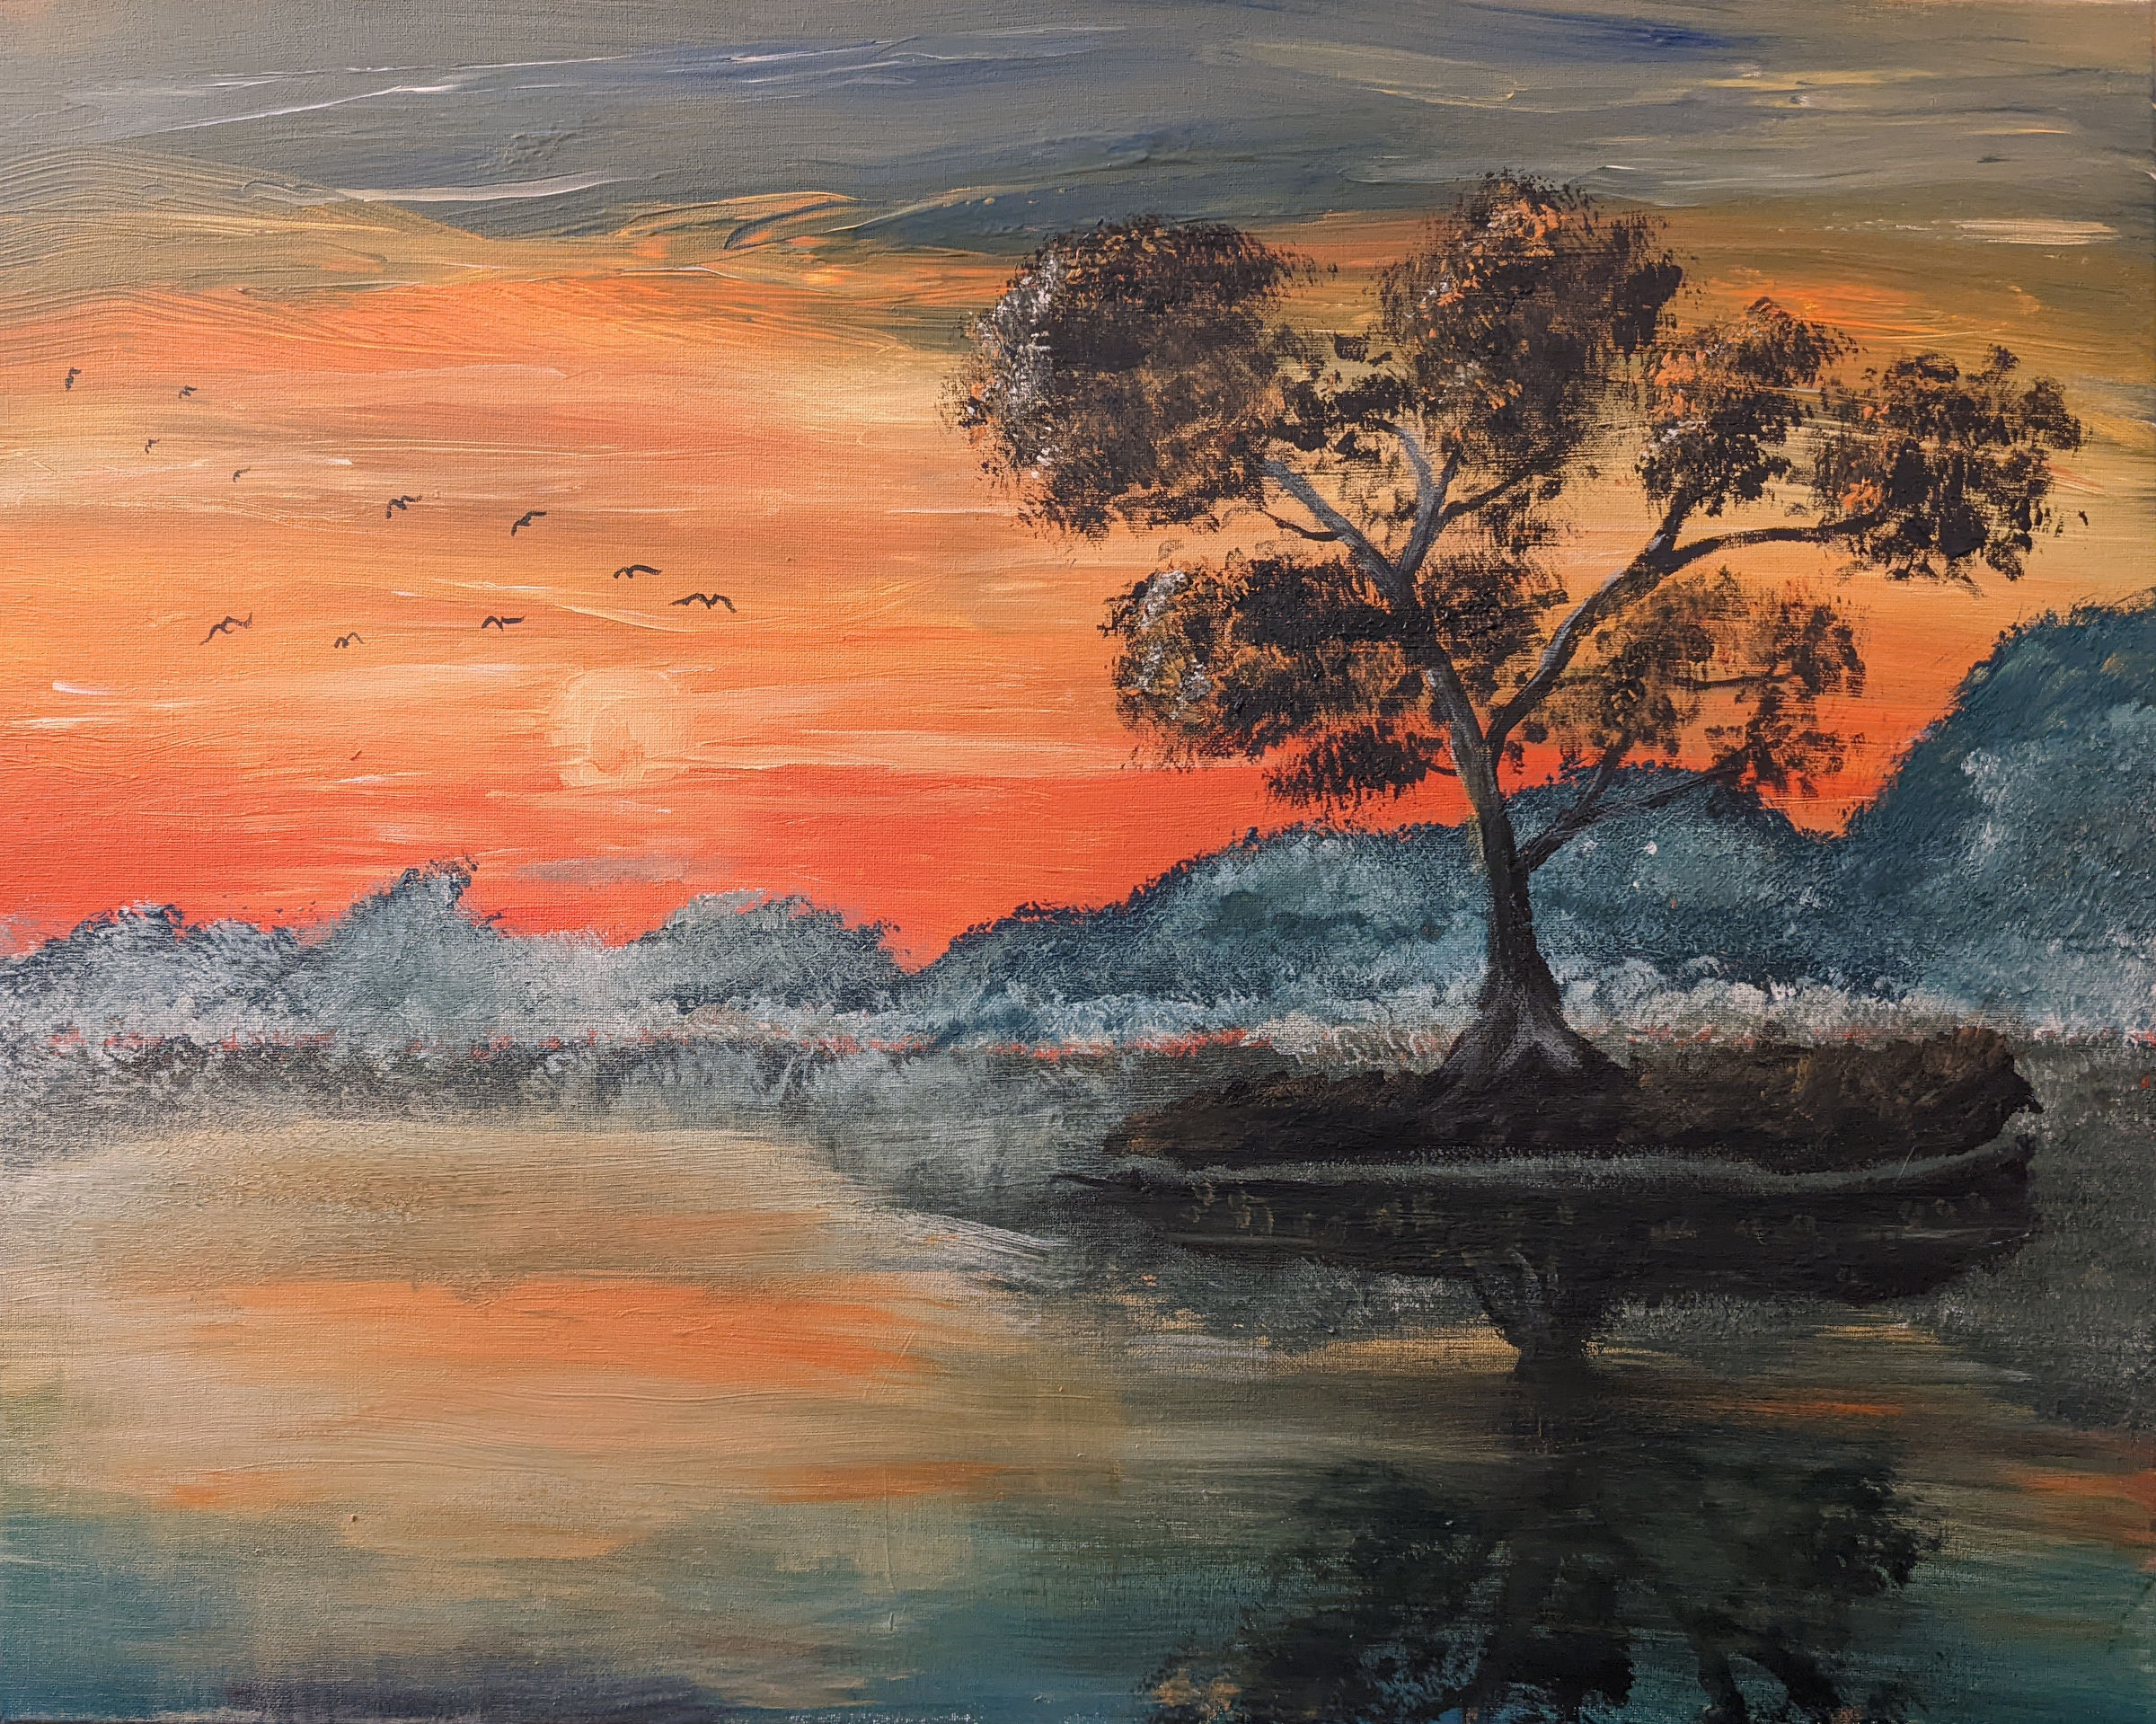 Setting sun in an orange sky over a lake. Several birds are flying through the sunlight, and a tree blows in the wind on a tiny island in the lake.